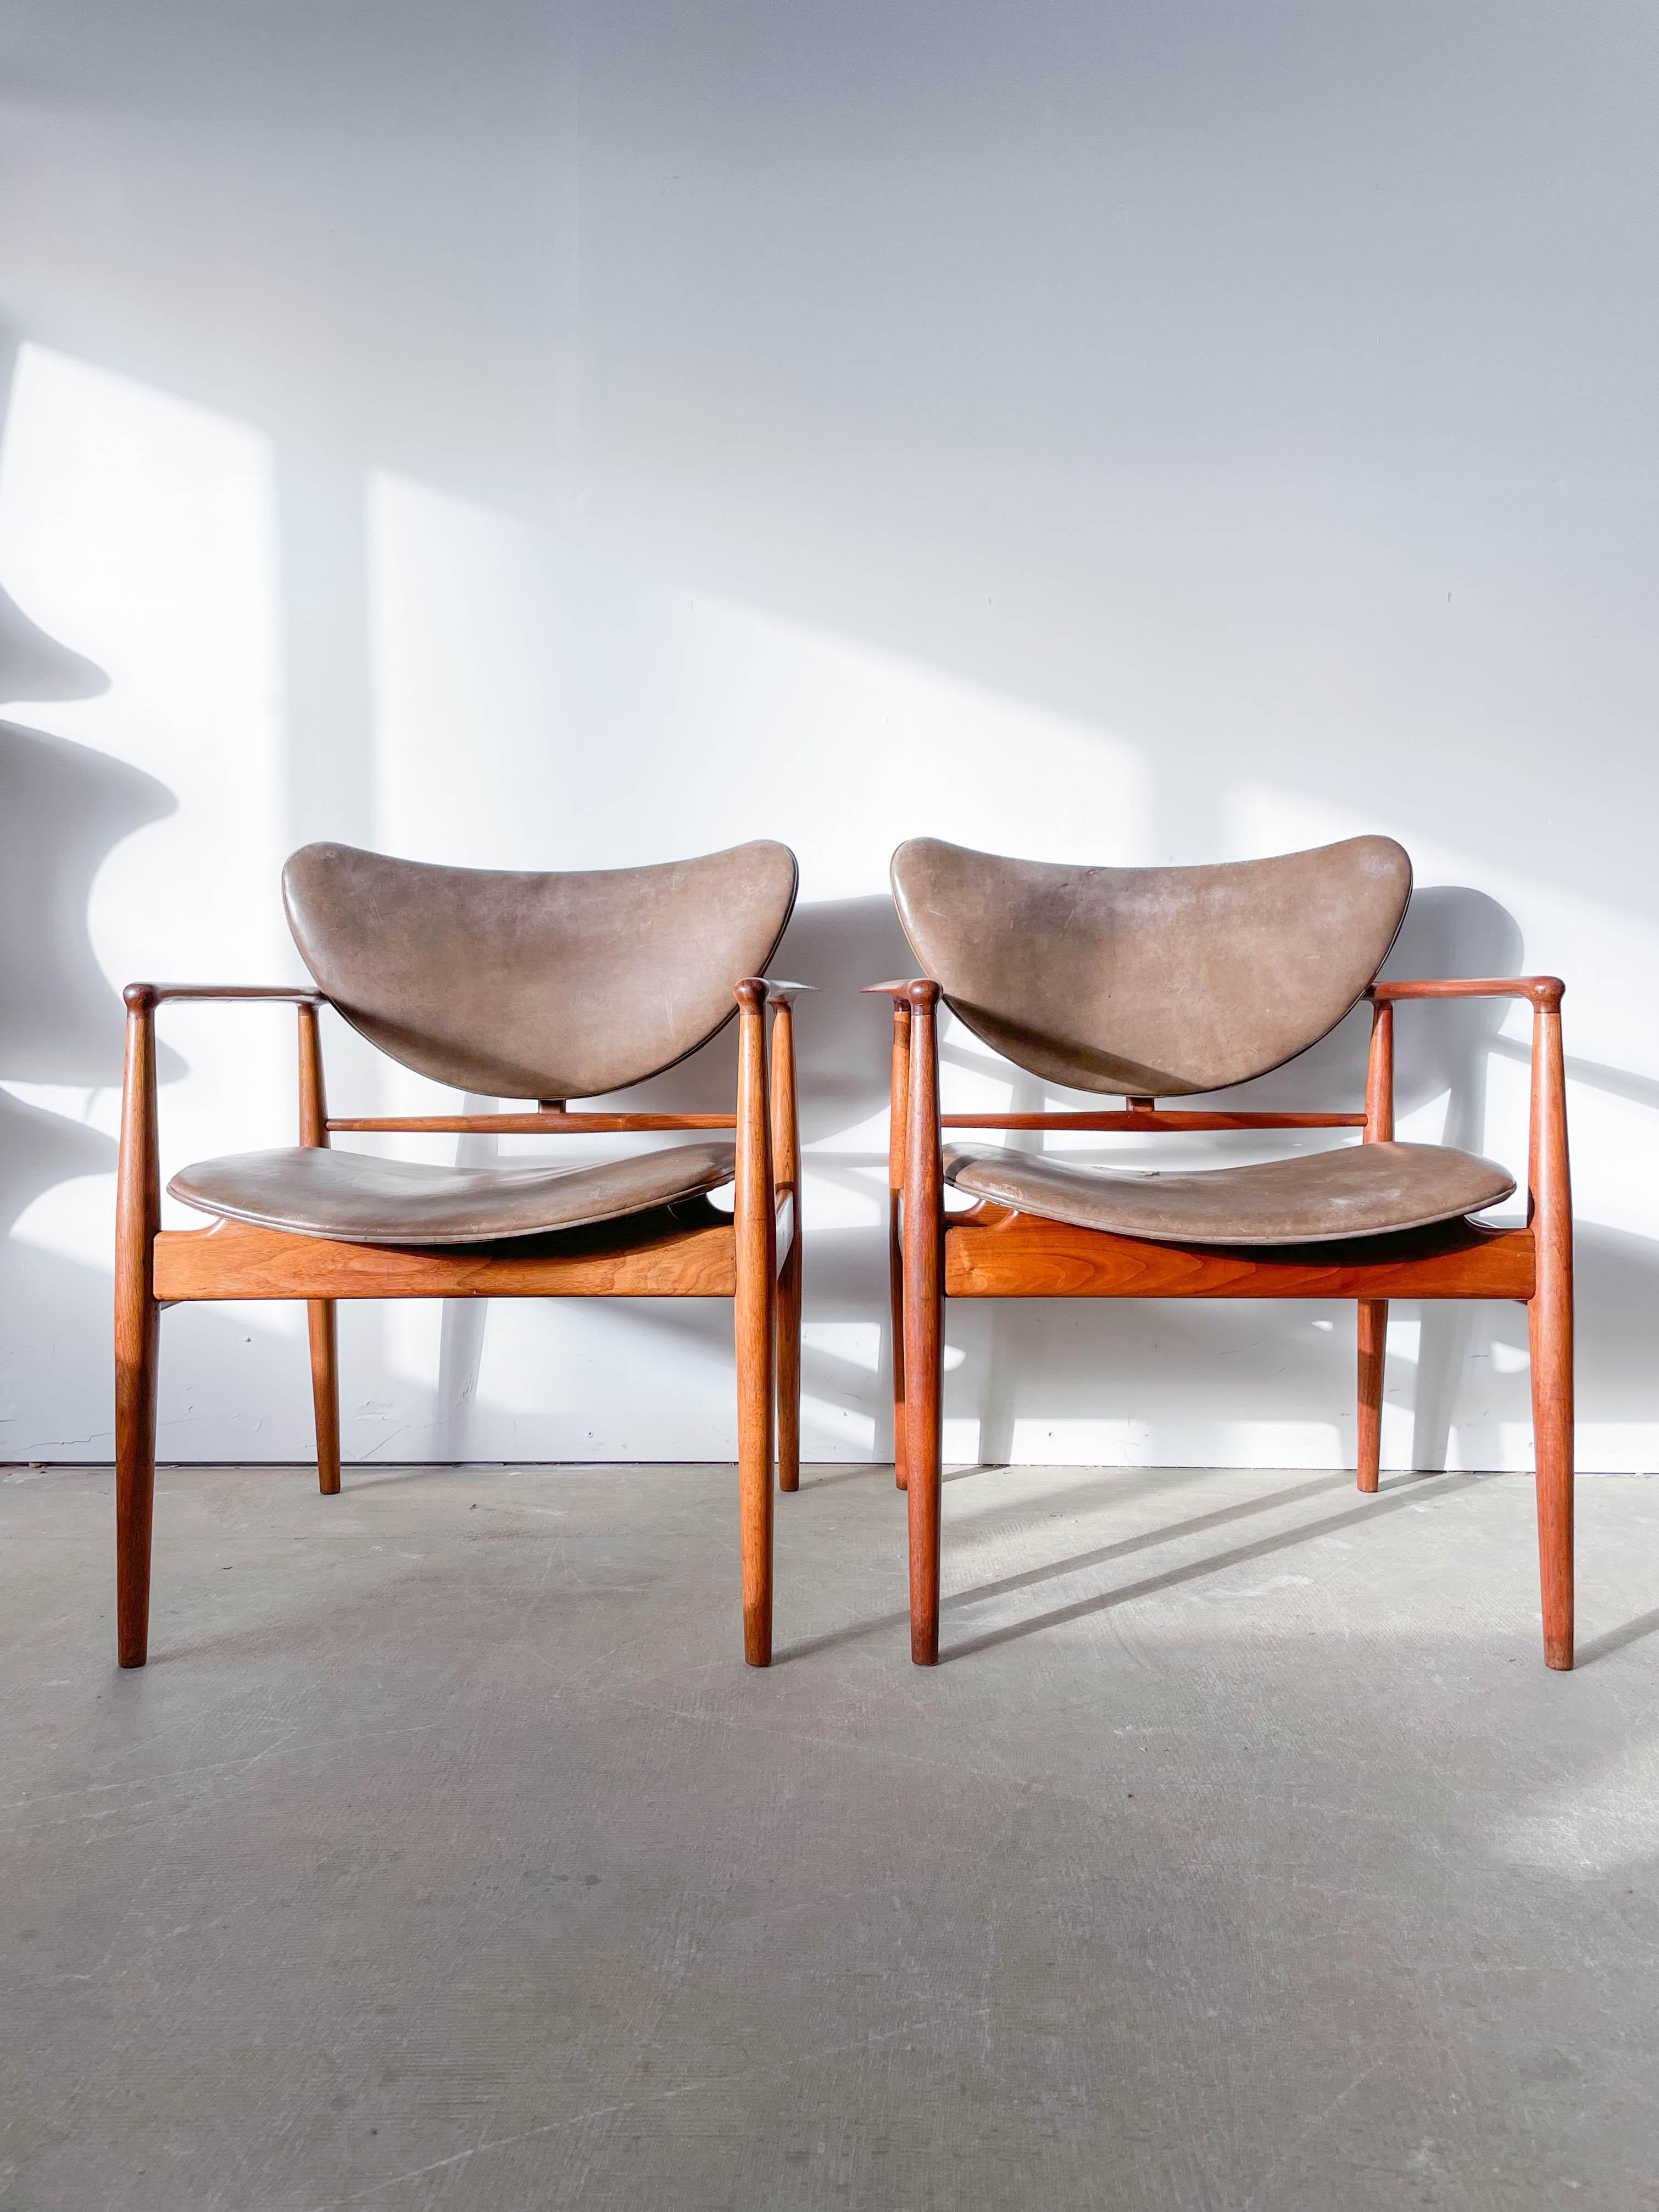 This is an original pair of Finn Juhl’s famous 1948 armchairs produced by Baker Furniture Company in Grand Rapids, Michigan, as part of their fantastic Baker Modern line from 1952-1955. Solid walnut frames are superbly sculpted cradling bent plywood